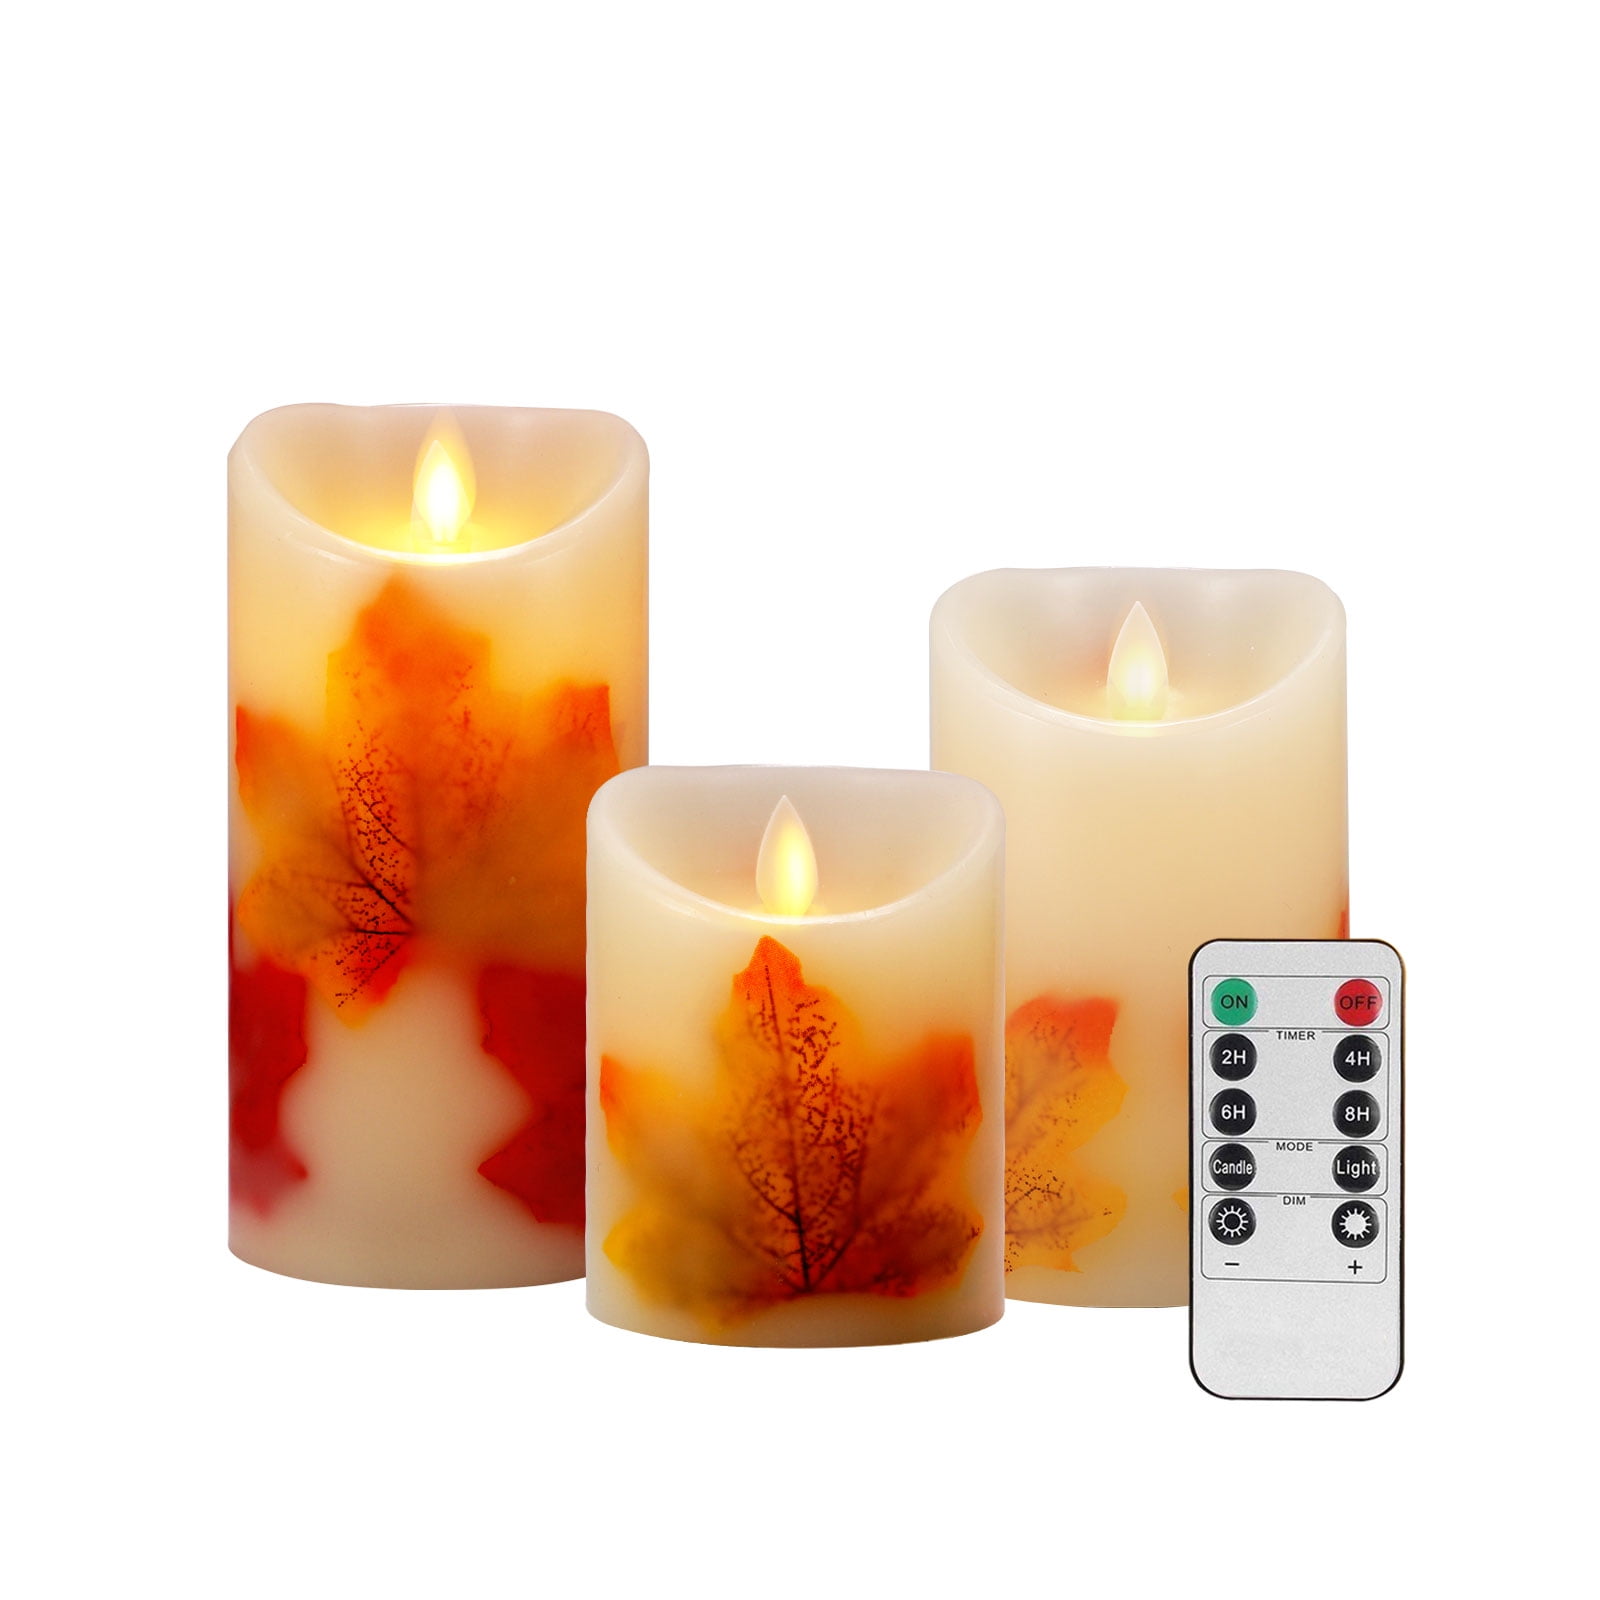 9 Christmas Flameless Candles Flickering Decor 4Pcs Christmas Decorations Candle Lights for Window Table with LED Lights Battery Operated Simulation Flame Candle Orange Night Light Indoor Outdoor